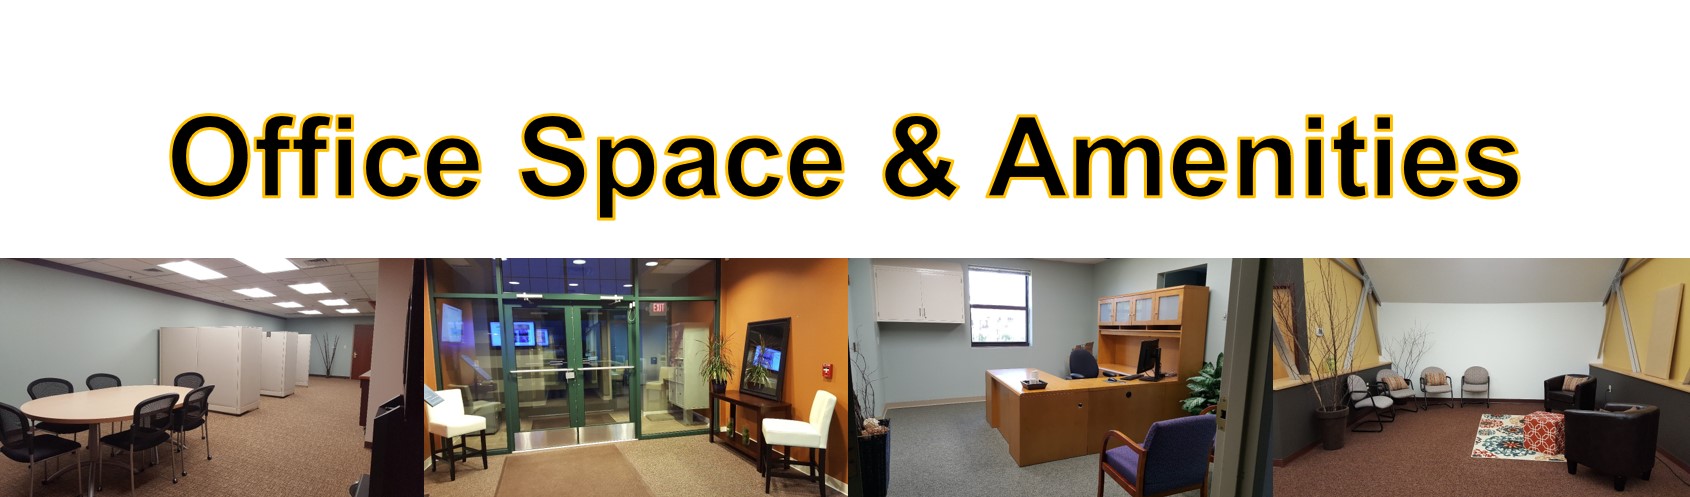 Office suite, entrance lobby, single office, and small gathering space